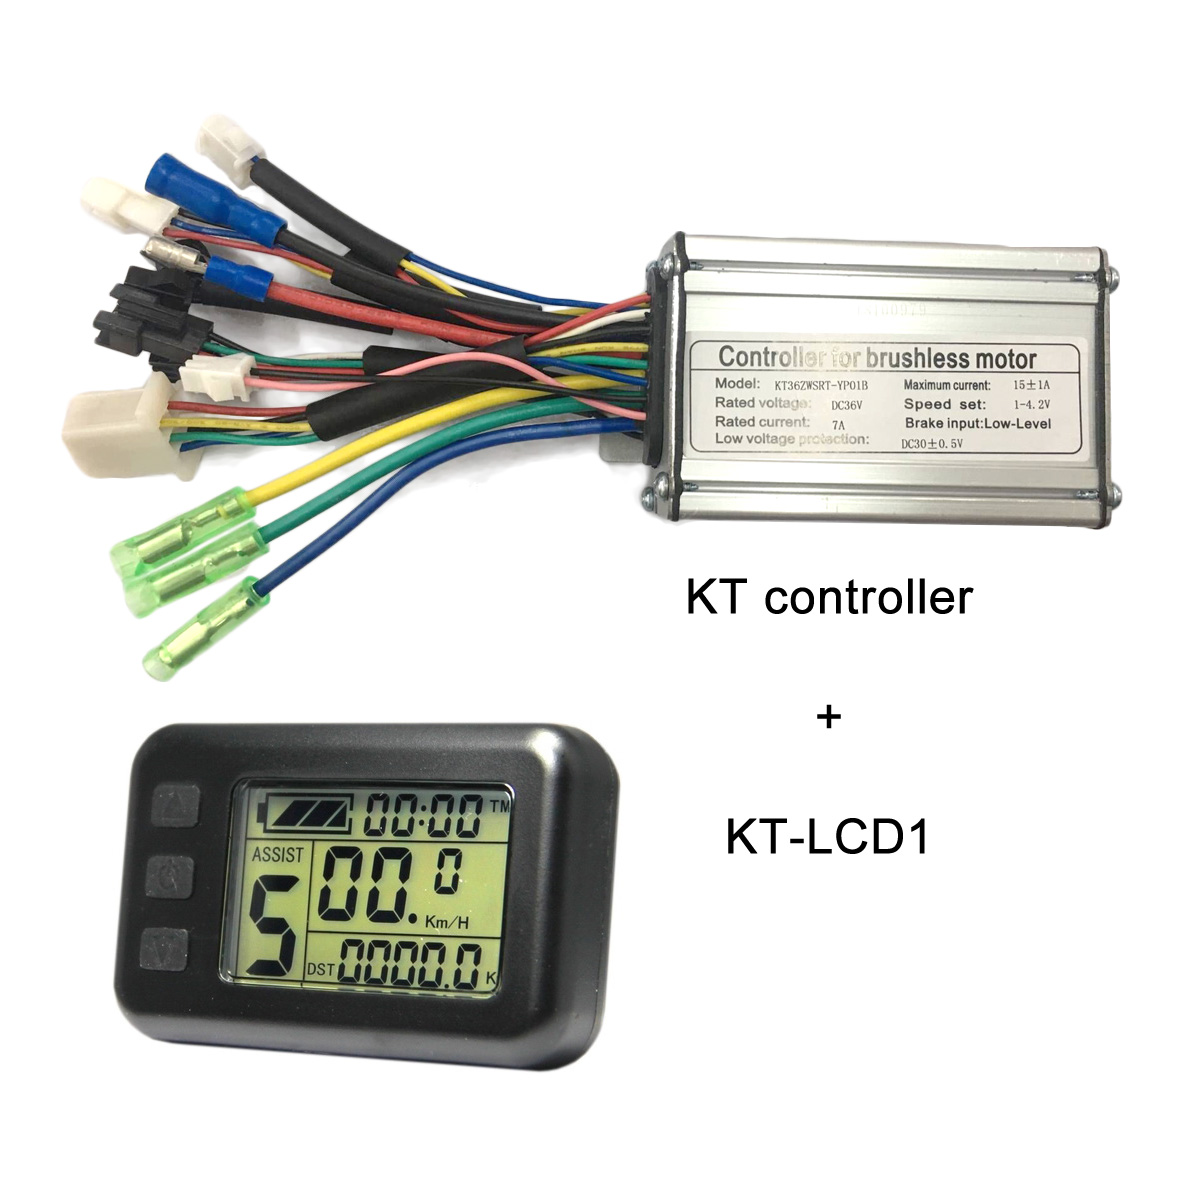 KT controllers wit KT-LCD1 electric bike display